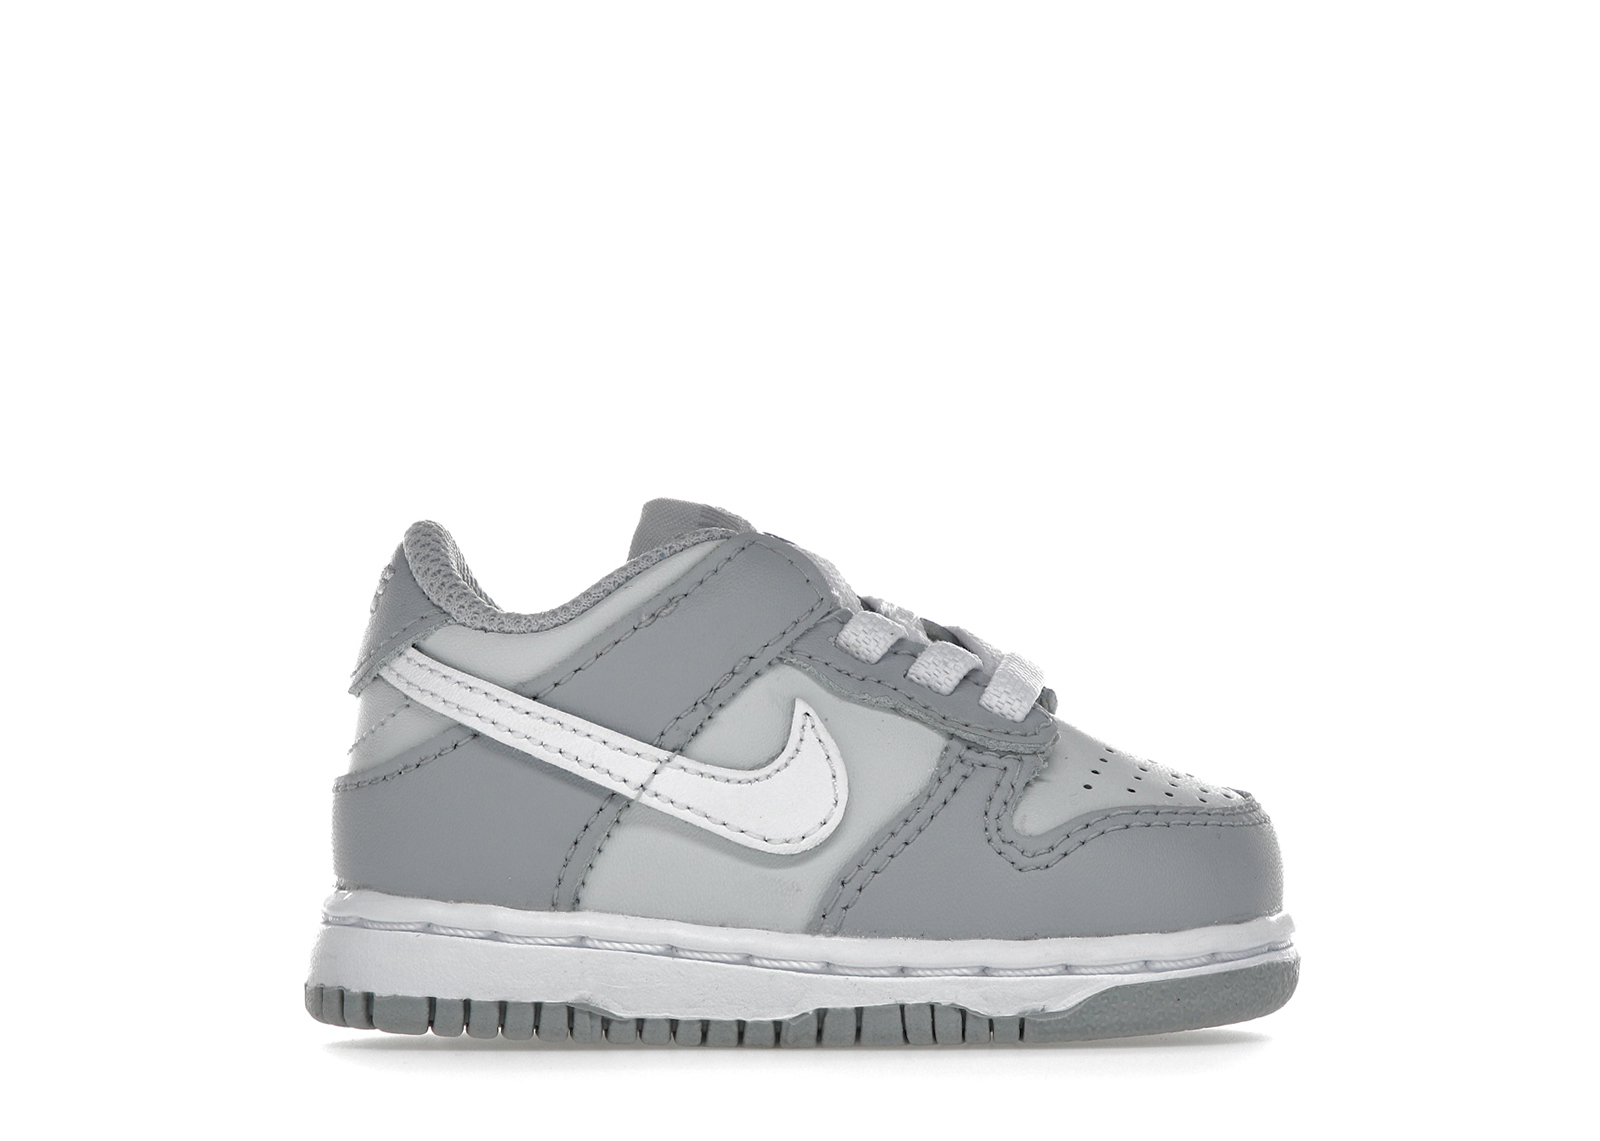 Nike Dunk Low Two-Toned Grey (TD) - DH9761-001 - US